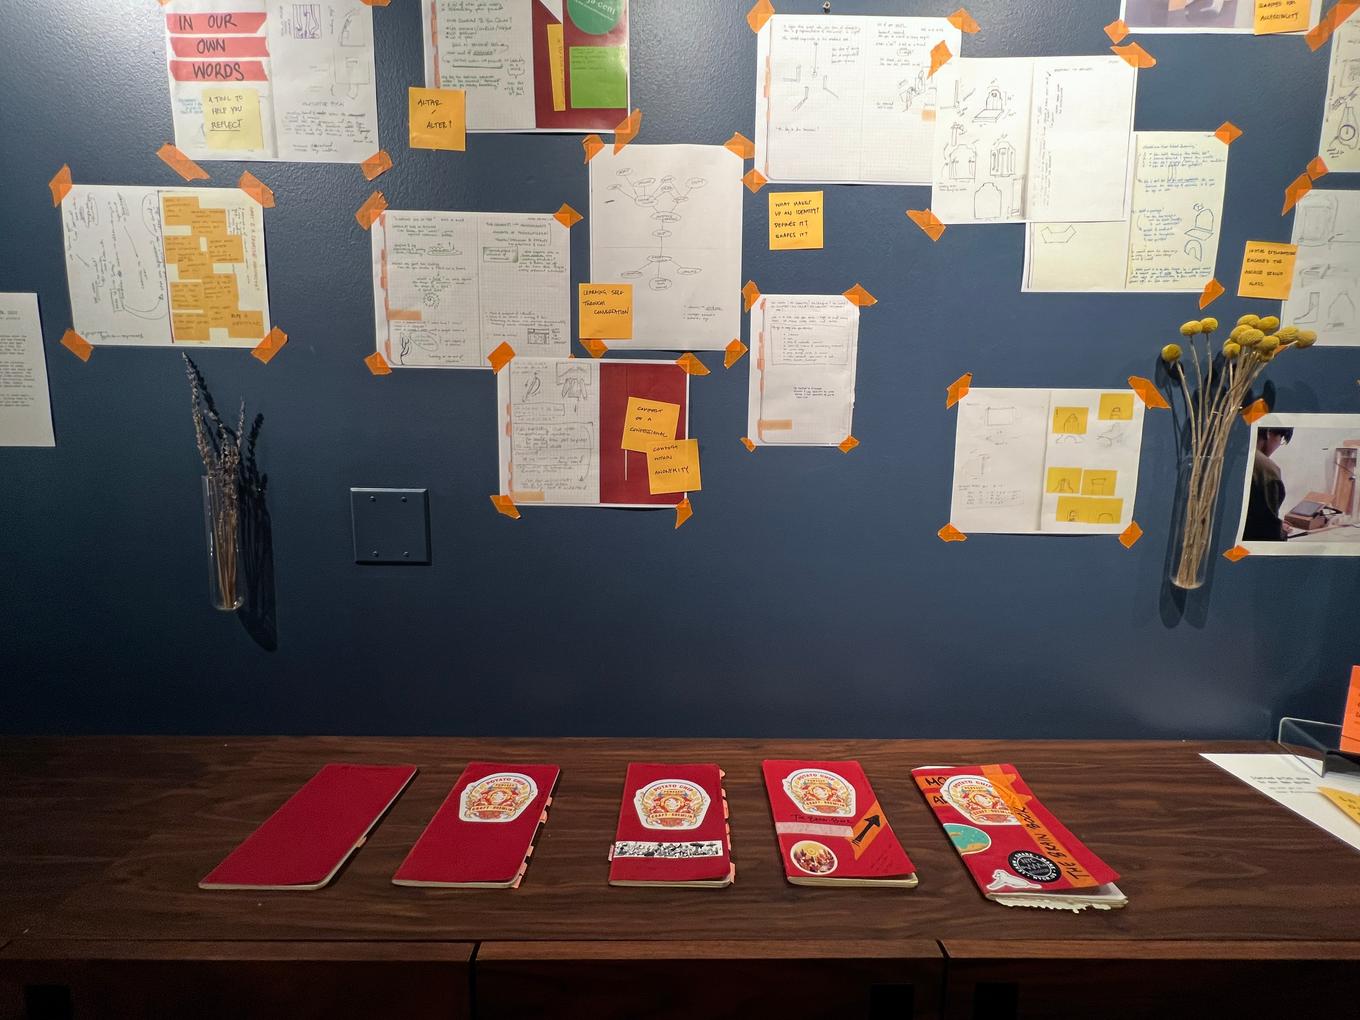 Front-facing image of wall, including many pages of sketches, writing, and ideation taped with orange tape. On a shelf at the bottom of the image is 5 notebooks.